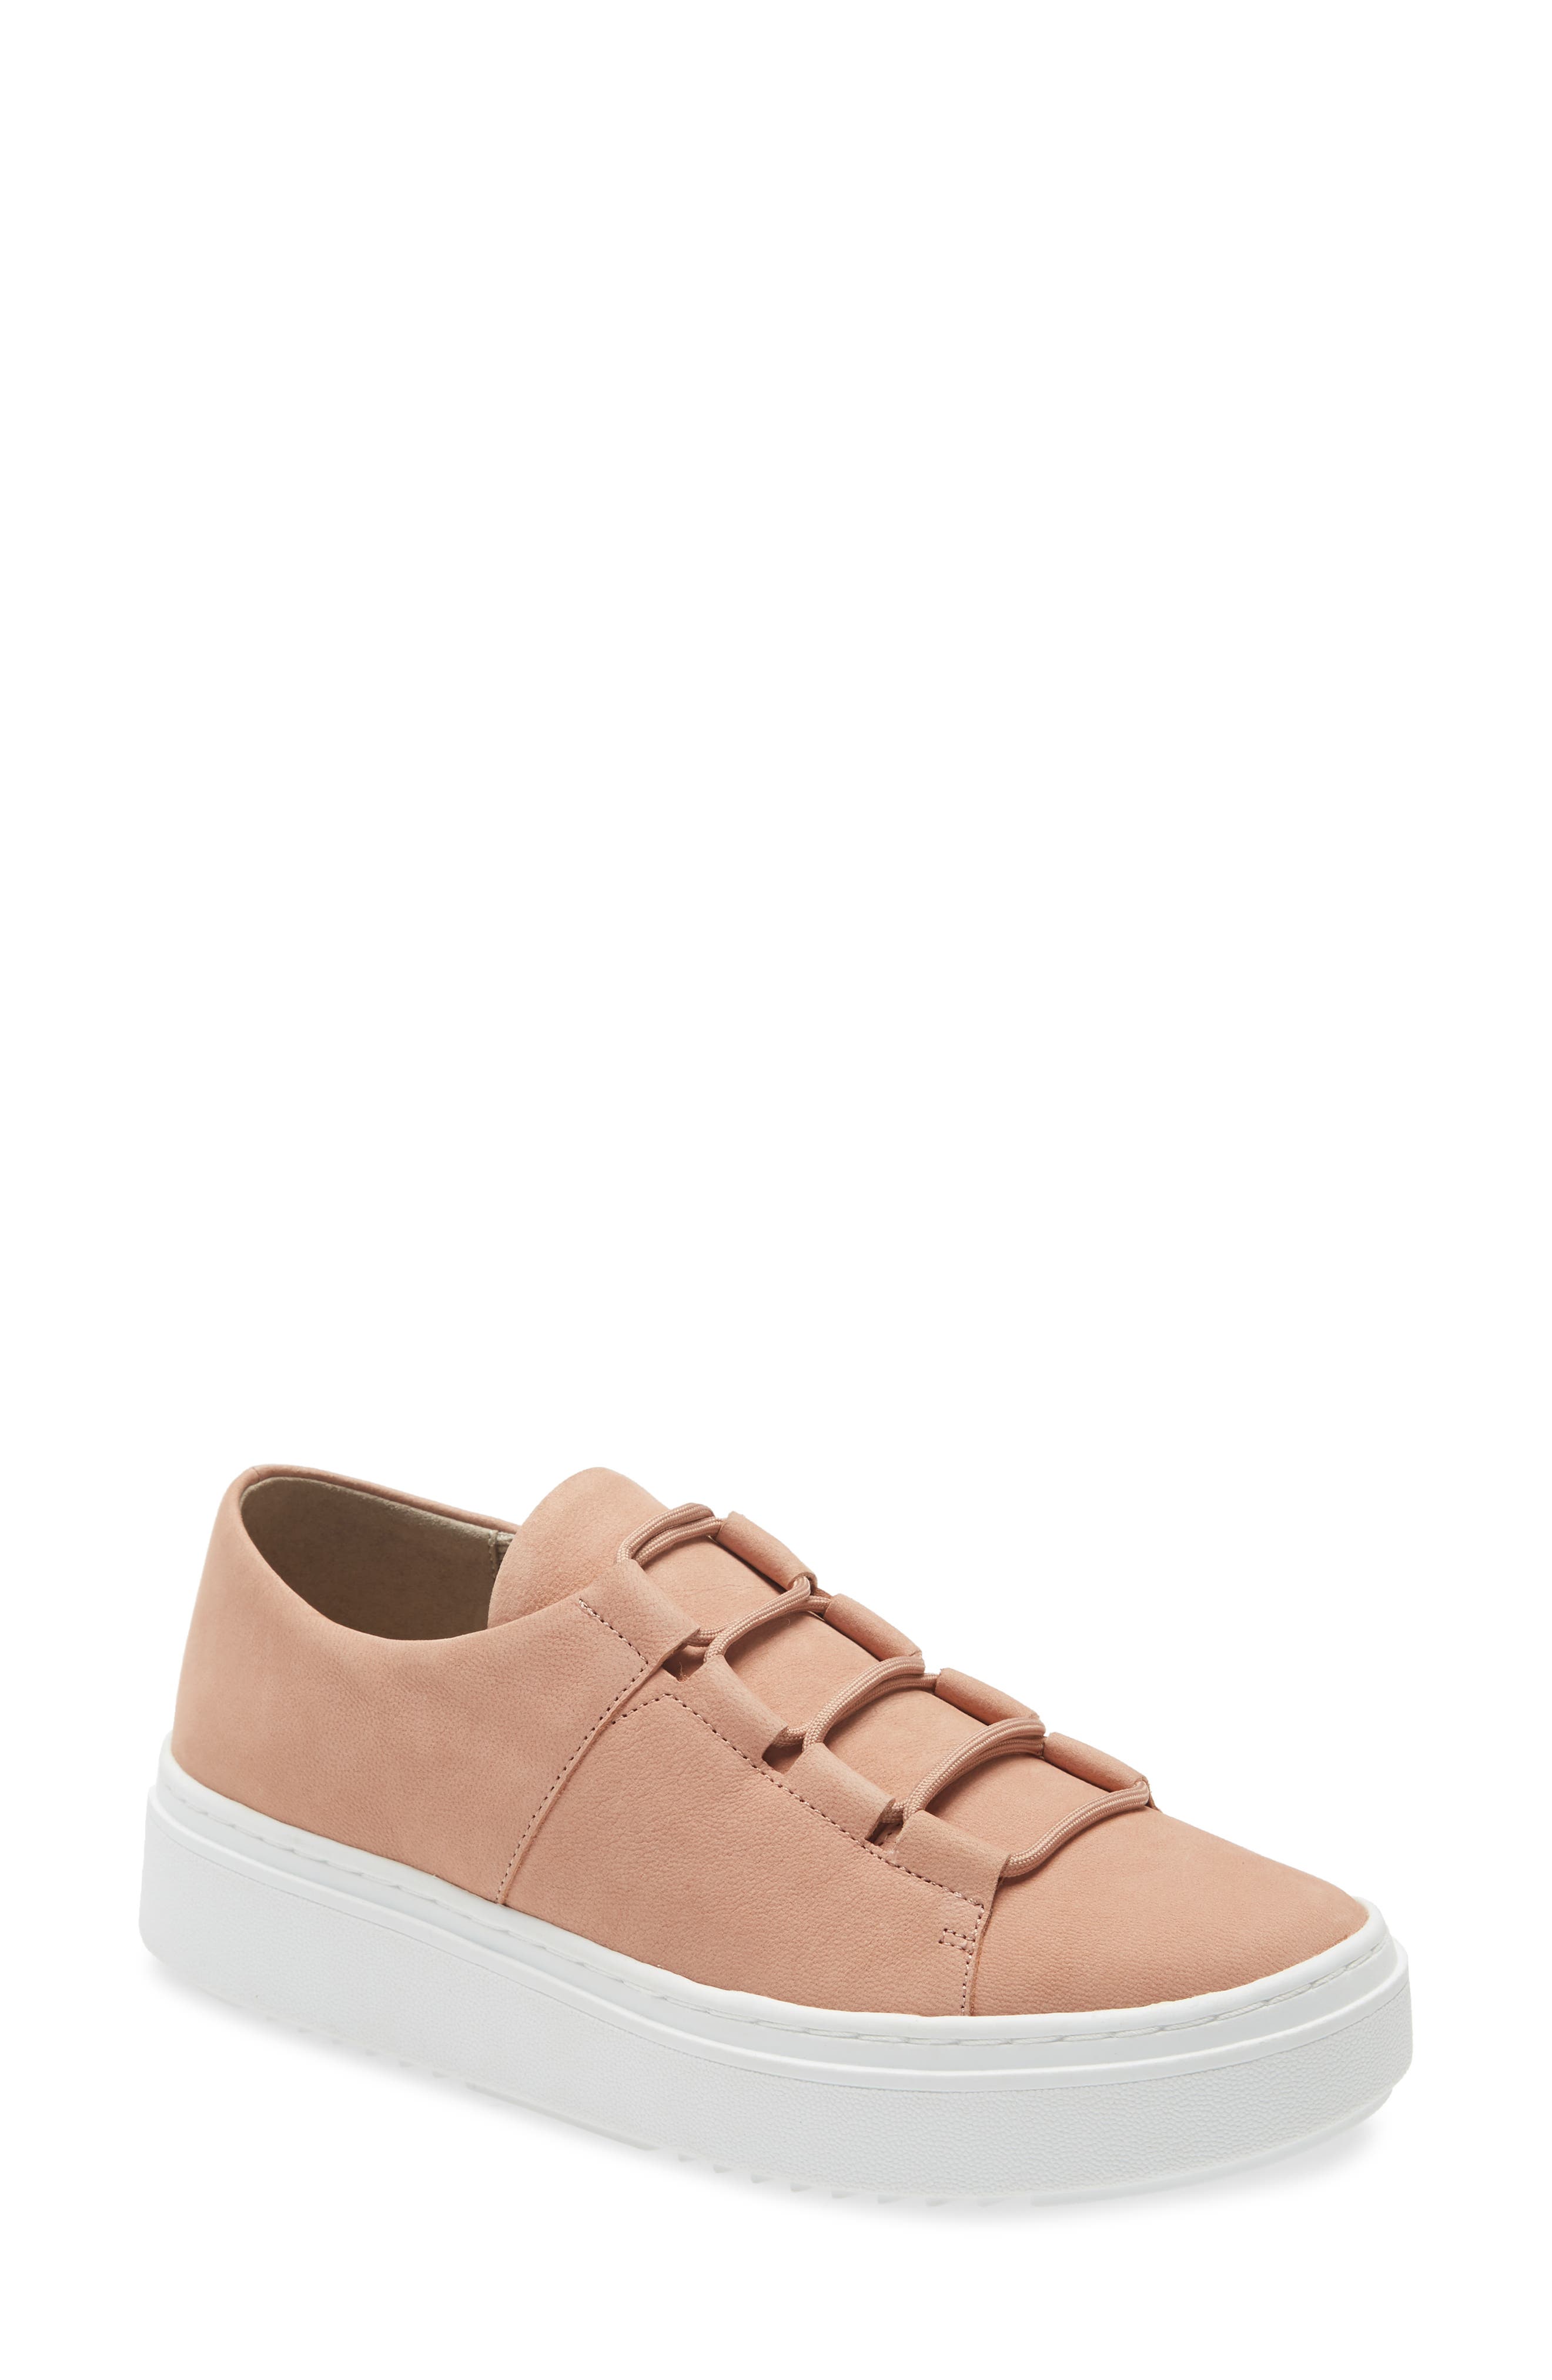 eileen fisher sale shoes